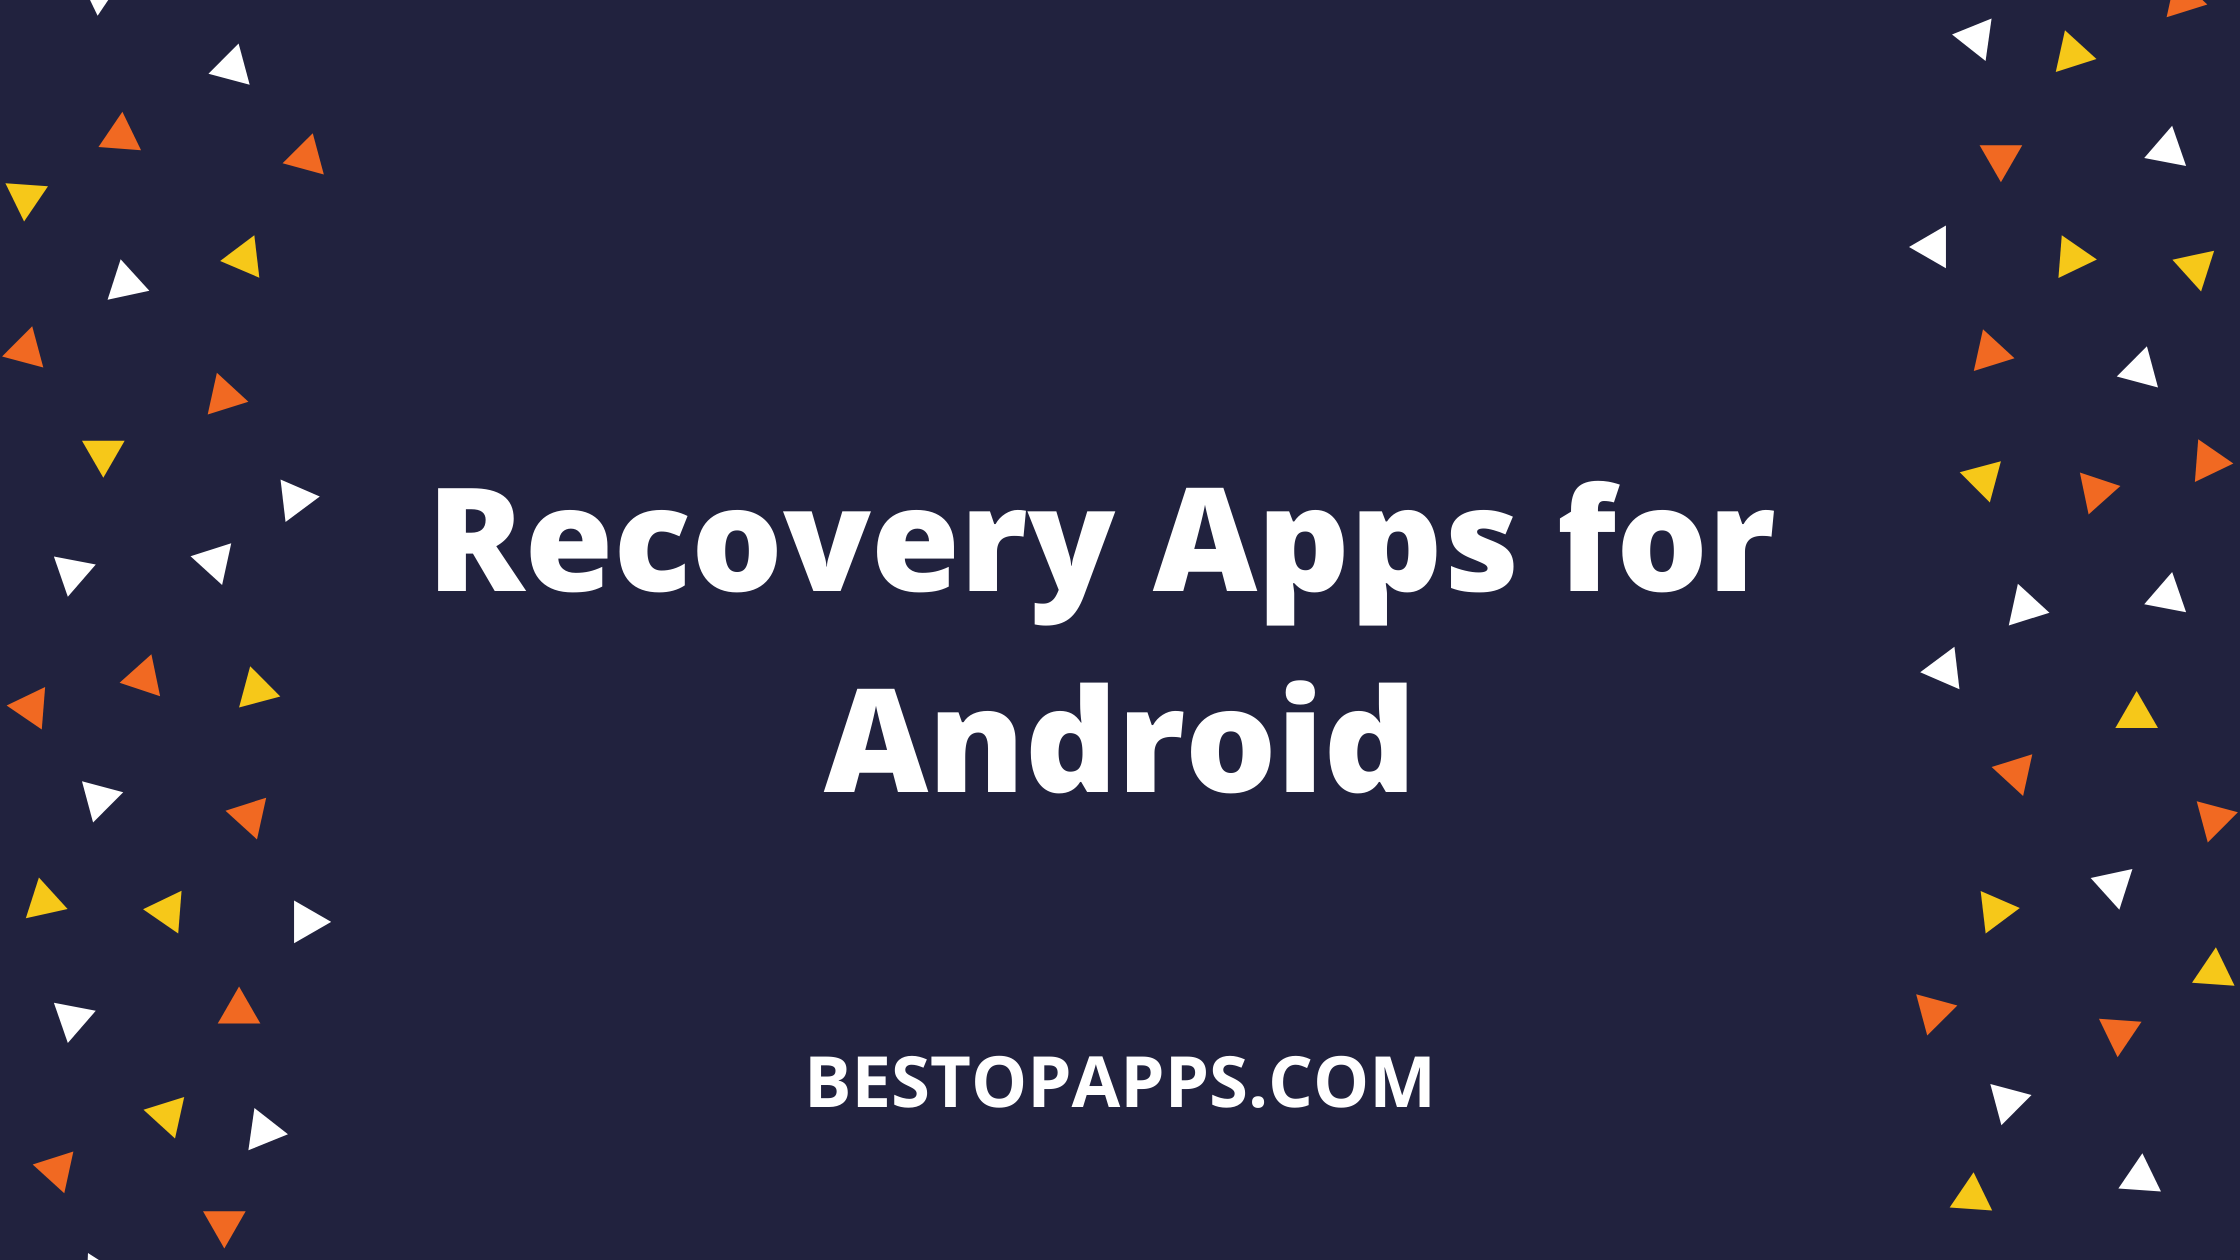 Recovery Apps for Android